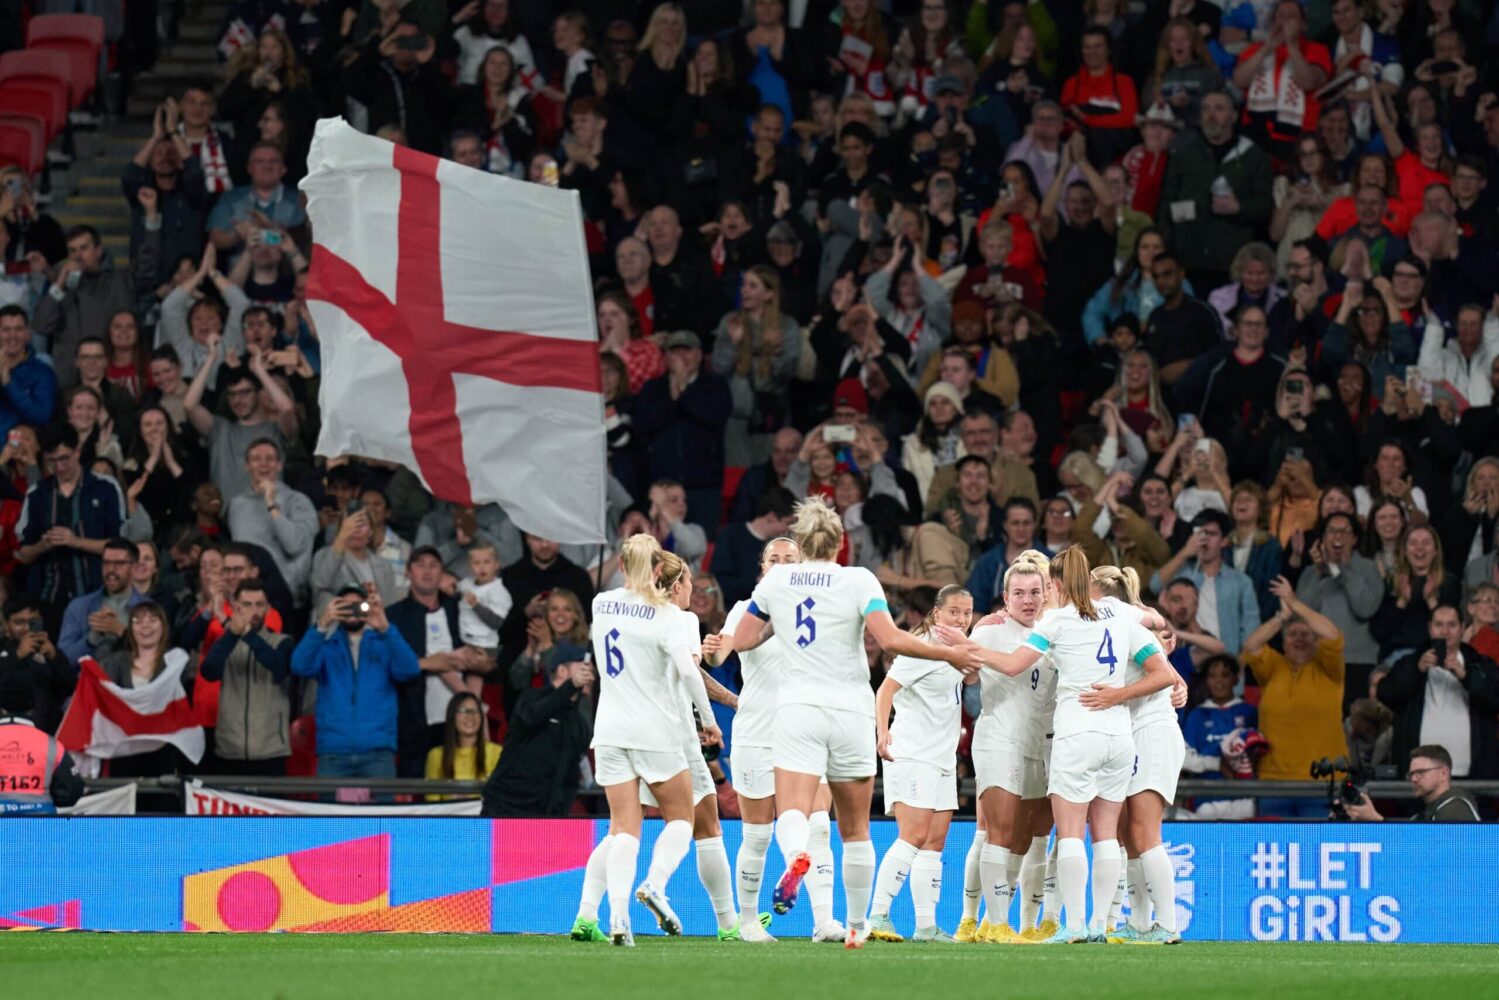 England celebrate their second goal in a friendly match with the United States at Wembley Stadium.